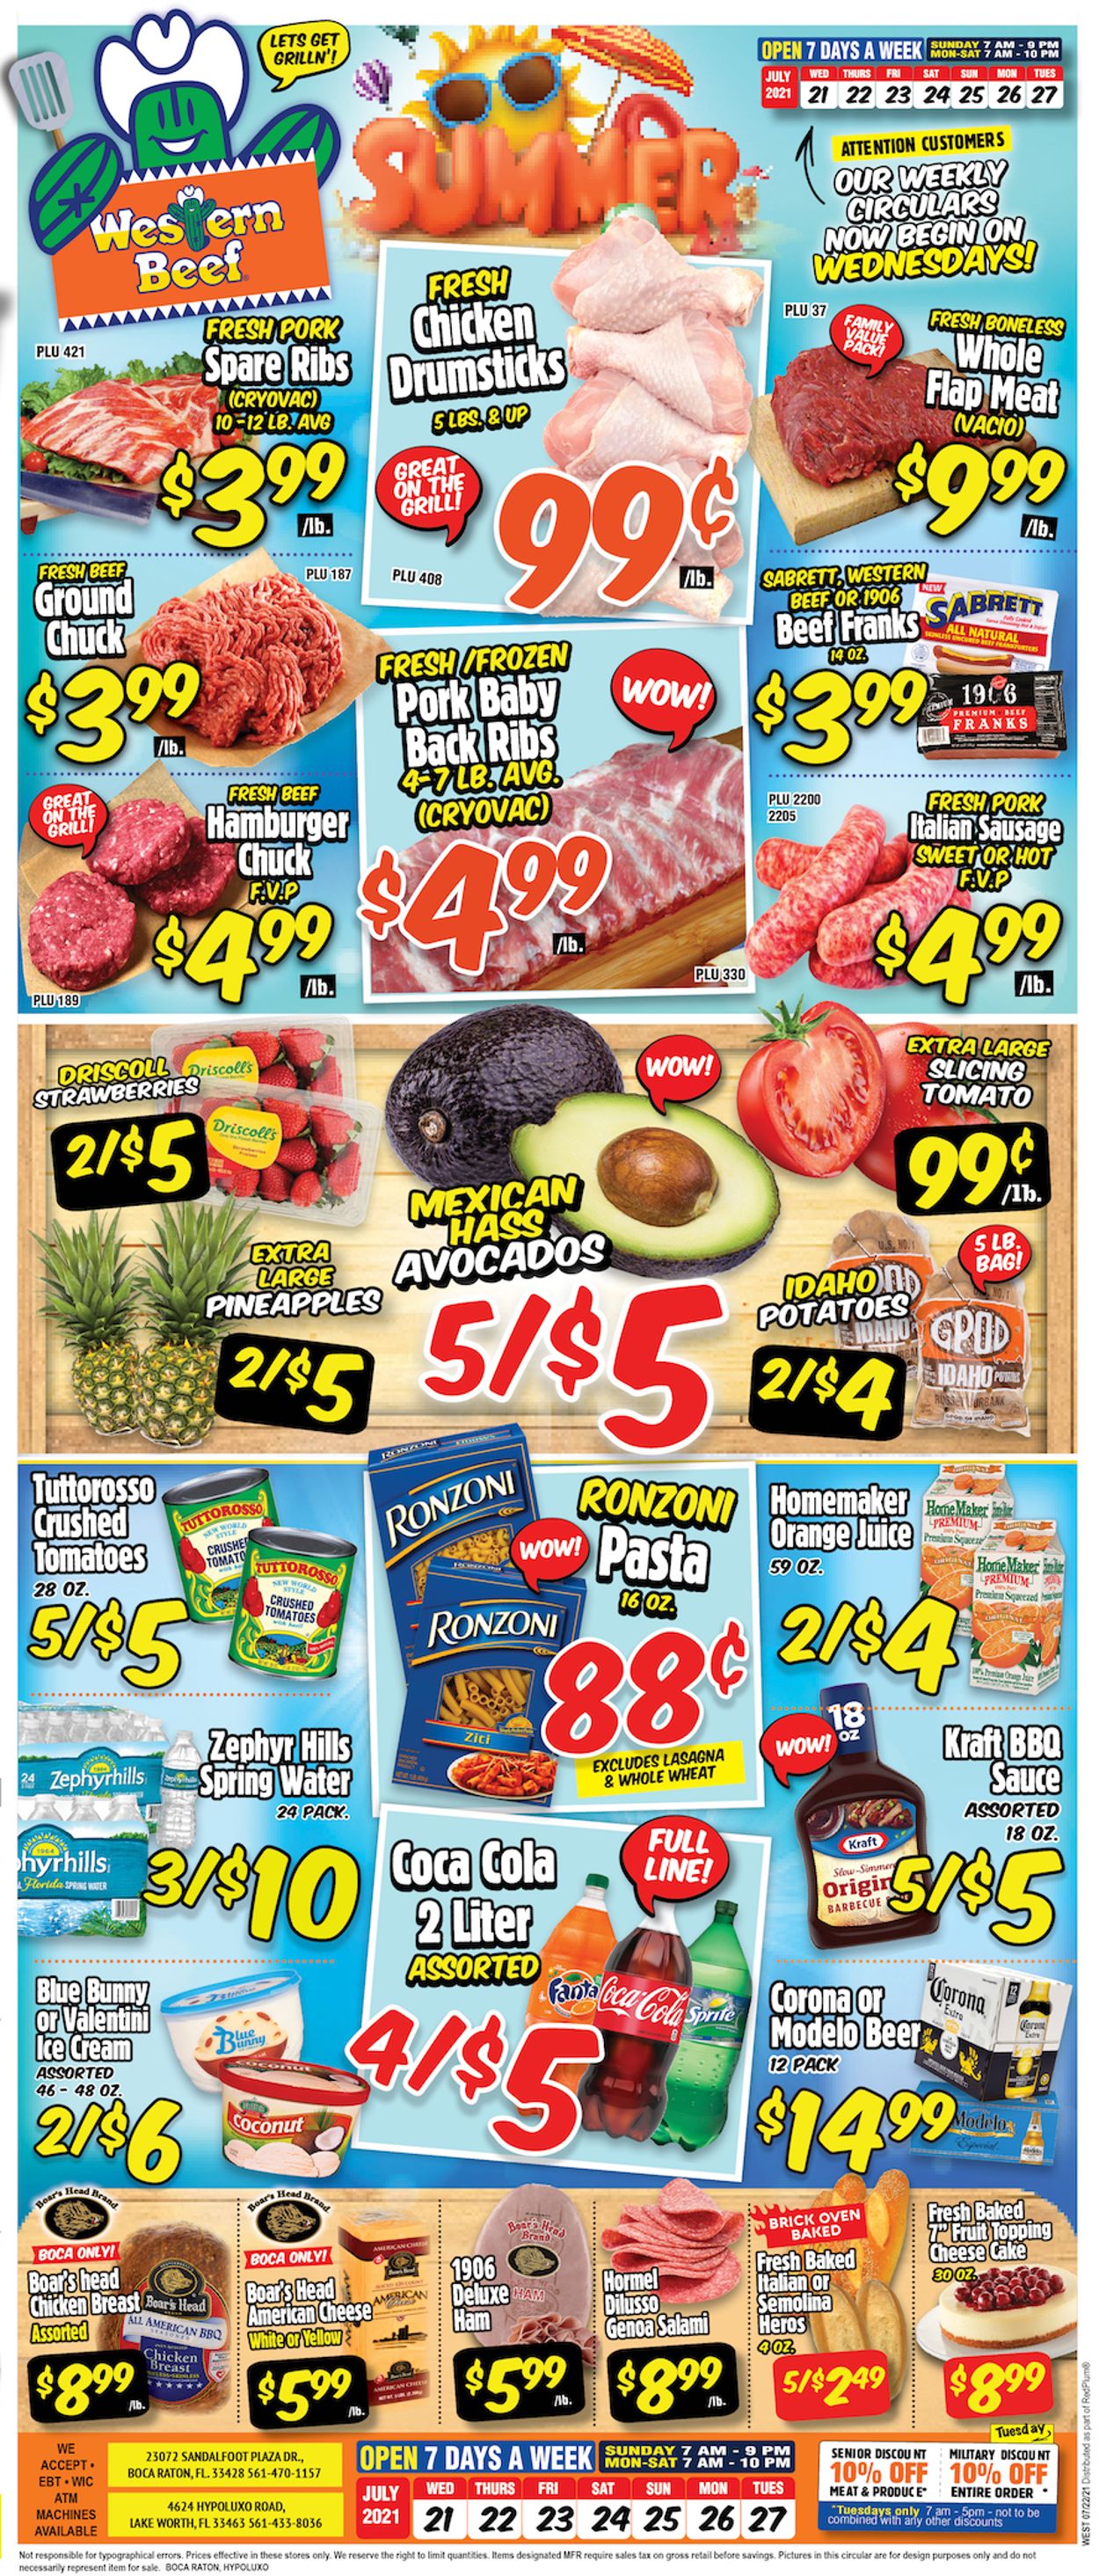 Western Beef Current weekly ad 07/21 - 07/27/2021 - frequent-ads.com